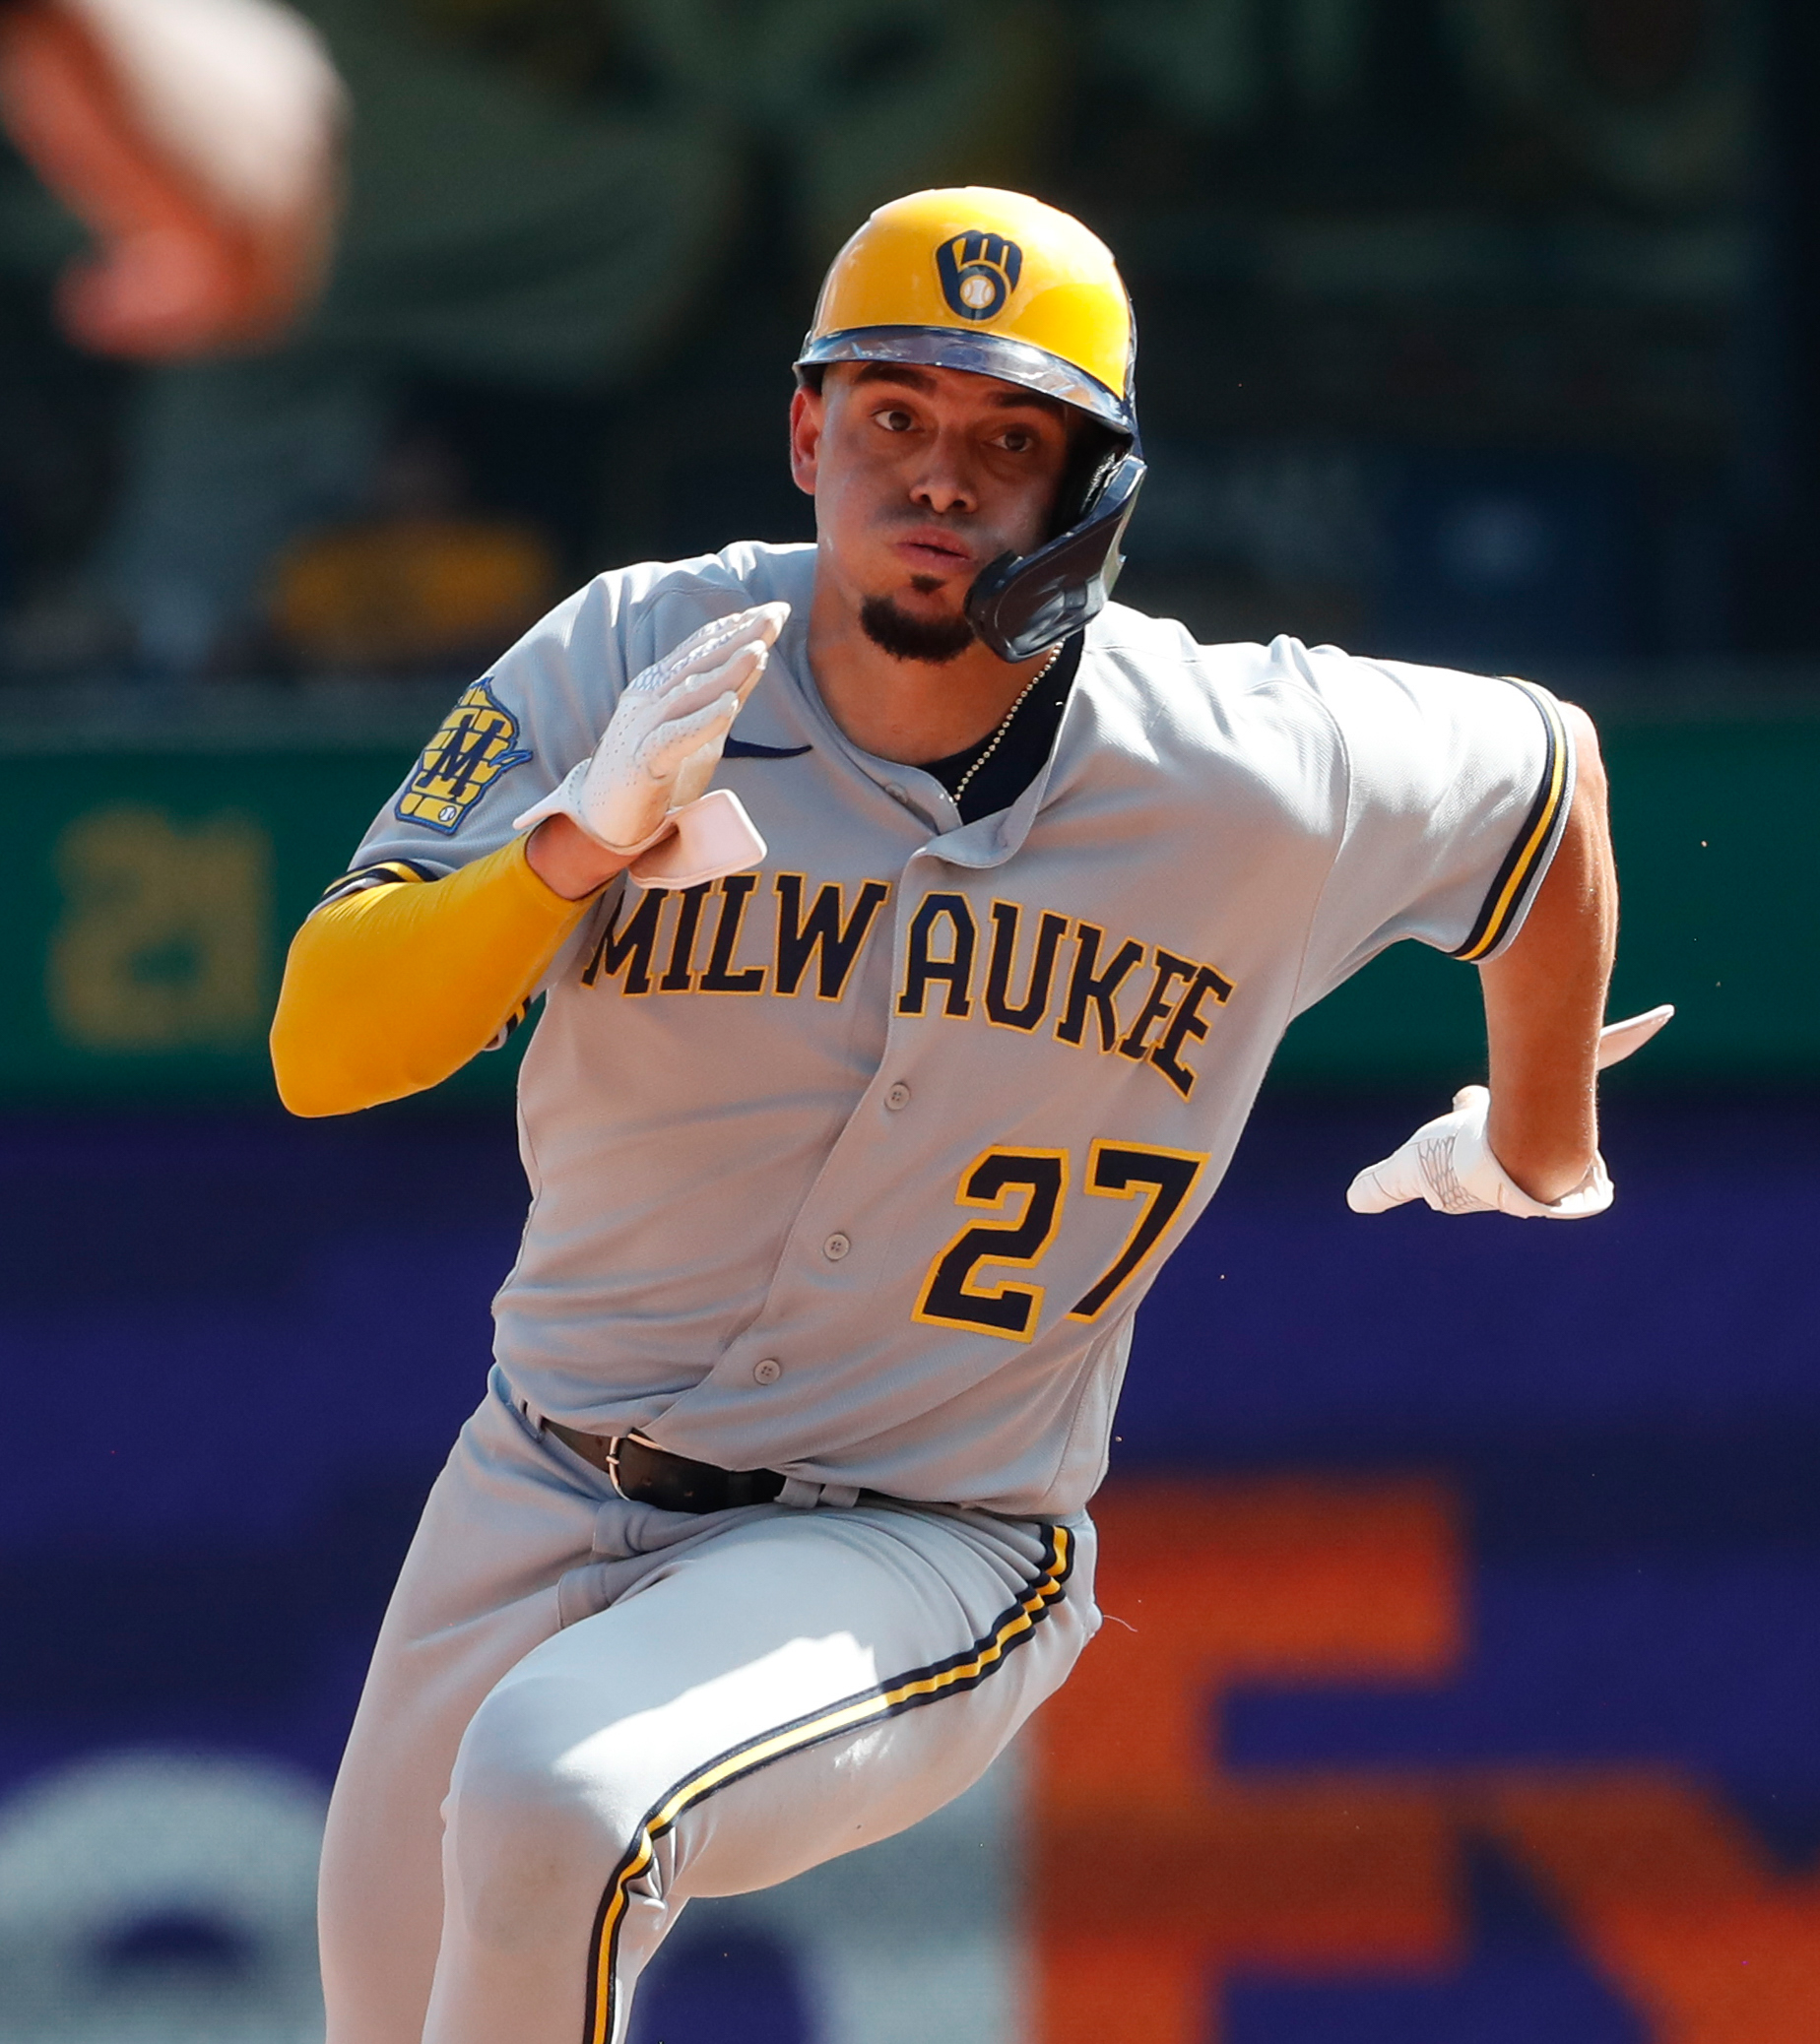 Milwaukee Brewers Shortstop Willy Adames had the best reaction